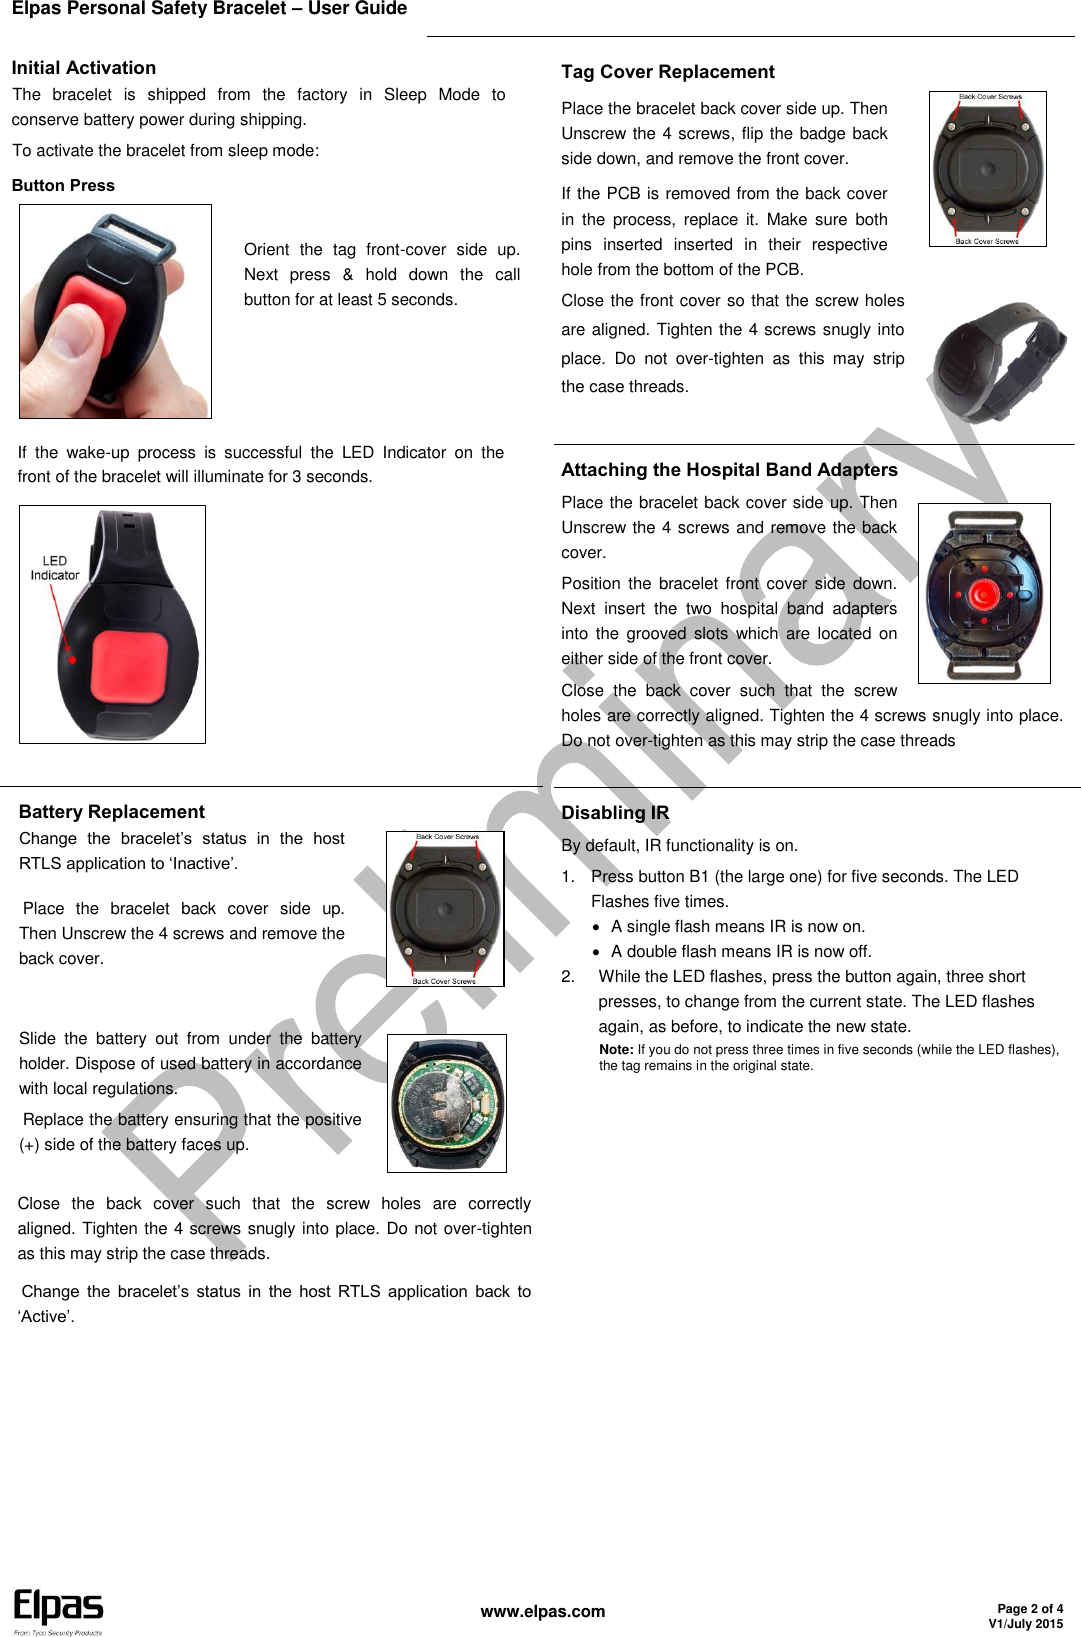 Elpas Personal Safety Bracelet – User Guide    www.elpas.com Page 2 of 4 V1/July 2015  Initial Activation The  bracelet  is  shipped  from  the  factory  in  Sleep  Mode  to conserve battery power during shipping. To activate the bracelet from sleep mode: Button Press  Orient  the  tag  front-cover  side  up. Next  press  &amp;  hold  down  the  call button for at least 5 seconds.   If  the  wake-up  process  is  successful  the  LED  Indicator  on  the front of the bracelet will illuminate for 3 seconds.  Tag Cover Replacement Place the bracelet back cover side up. Then Unscrew the 4 screws, flip the badge back side down, and remove the front cover. If the PCB is removed from the back cover in  the  process,  replace  it.  Make  sure  both pins  inserted  inserted  in  their  respective hole from the bottom of the PCB.  Close the front cover so that the screw holes are aligned. Tighten the 4 screws snugly into place.  Do  not  over-tighten  as  this  may  strip the case threads.   Attaching the Hospital Band Adapters Place the bracelet back cover side up. Then Unscrew the 4 screws and remove the back cover. Position  the bracelet front  cover side  down. Next  insert  the  two  hospital  band  adapters into  the  grooved  slots  which  are  located  on either side of the front cover. Close  the  back  cover  such  that  the  screw holes are correctly aligned. Tighten the 4 screws snugly into place. Do not over-tighten as this may strip the case threads  Battery Replacement Change  the  bracelet’s  status  in  the  host RTLS application to ‘Inactive’. Place  the  bracelet  back  cover  side  up. Then Unscrew the 4 screws and remove the back cover.  Slide  the  battery  out  from  under  the  battery holder. Dispose of used battery in accordance with local regulations. Replace the battery ensuring that the positive (+) side of the battery faces up.   Close  the  back  cover  such  that  the  screw  holes  are  correctly   aligned. Tighten the 4 screws snugly into place. Do not over-tighten as this may strip the case threads. Change  the  bracelet’s  status  in  the  host  RTLS  application  back  to ‘Active’.  Disabling IR By default, IR functionality is on. 1.  Press button B1 (the large one) for five seconds. The LED Flashes five times.   A single flash means IR is now on.   A double flash means IR is now off. 2.  While the LED flashes, press the button again, three short presses, to change from the current state. The LED flashes again, as before, to indicate the new state. Note: If you do not press three times in five seconds (while the LED flashes), the tag remains in the original state.     